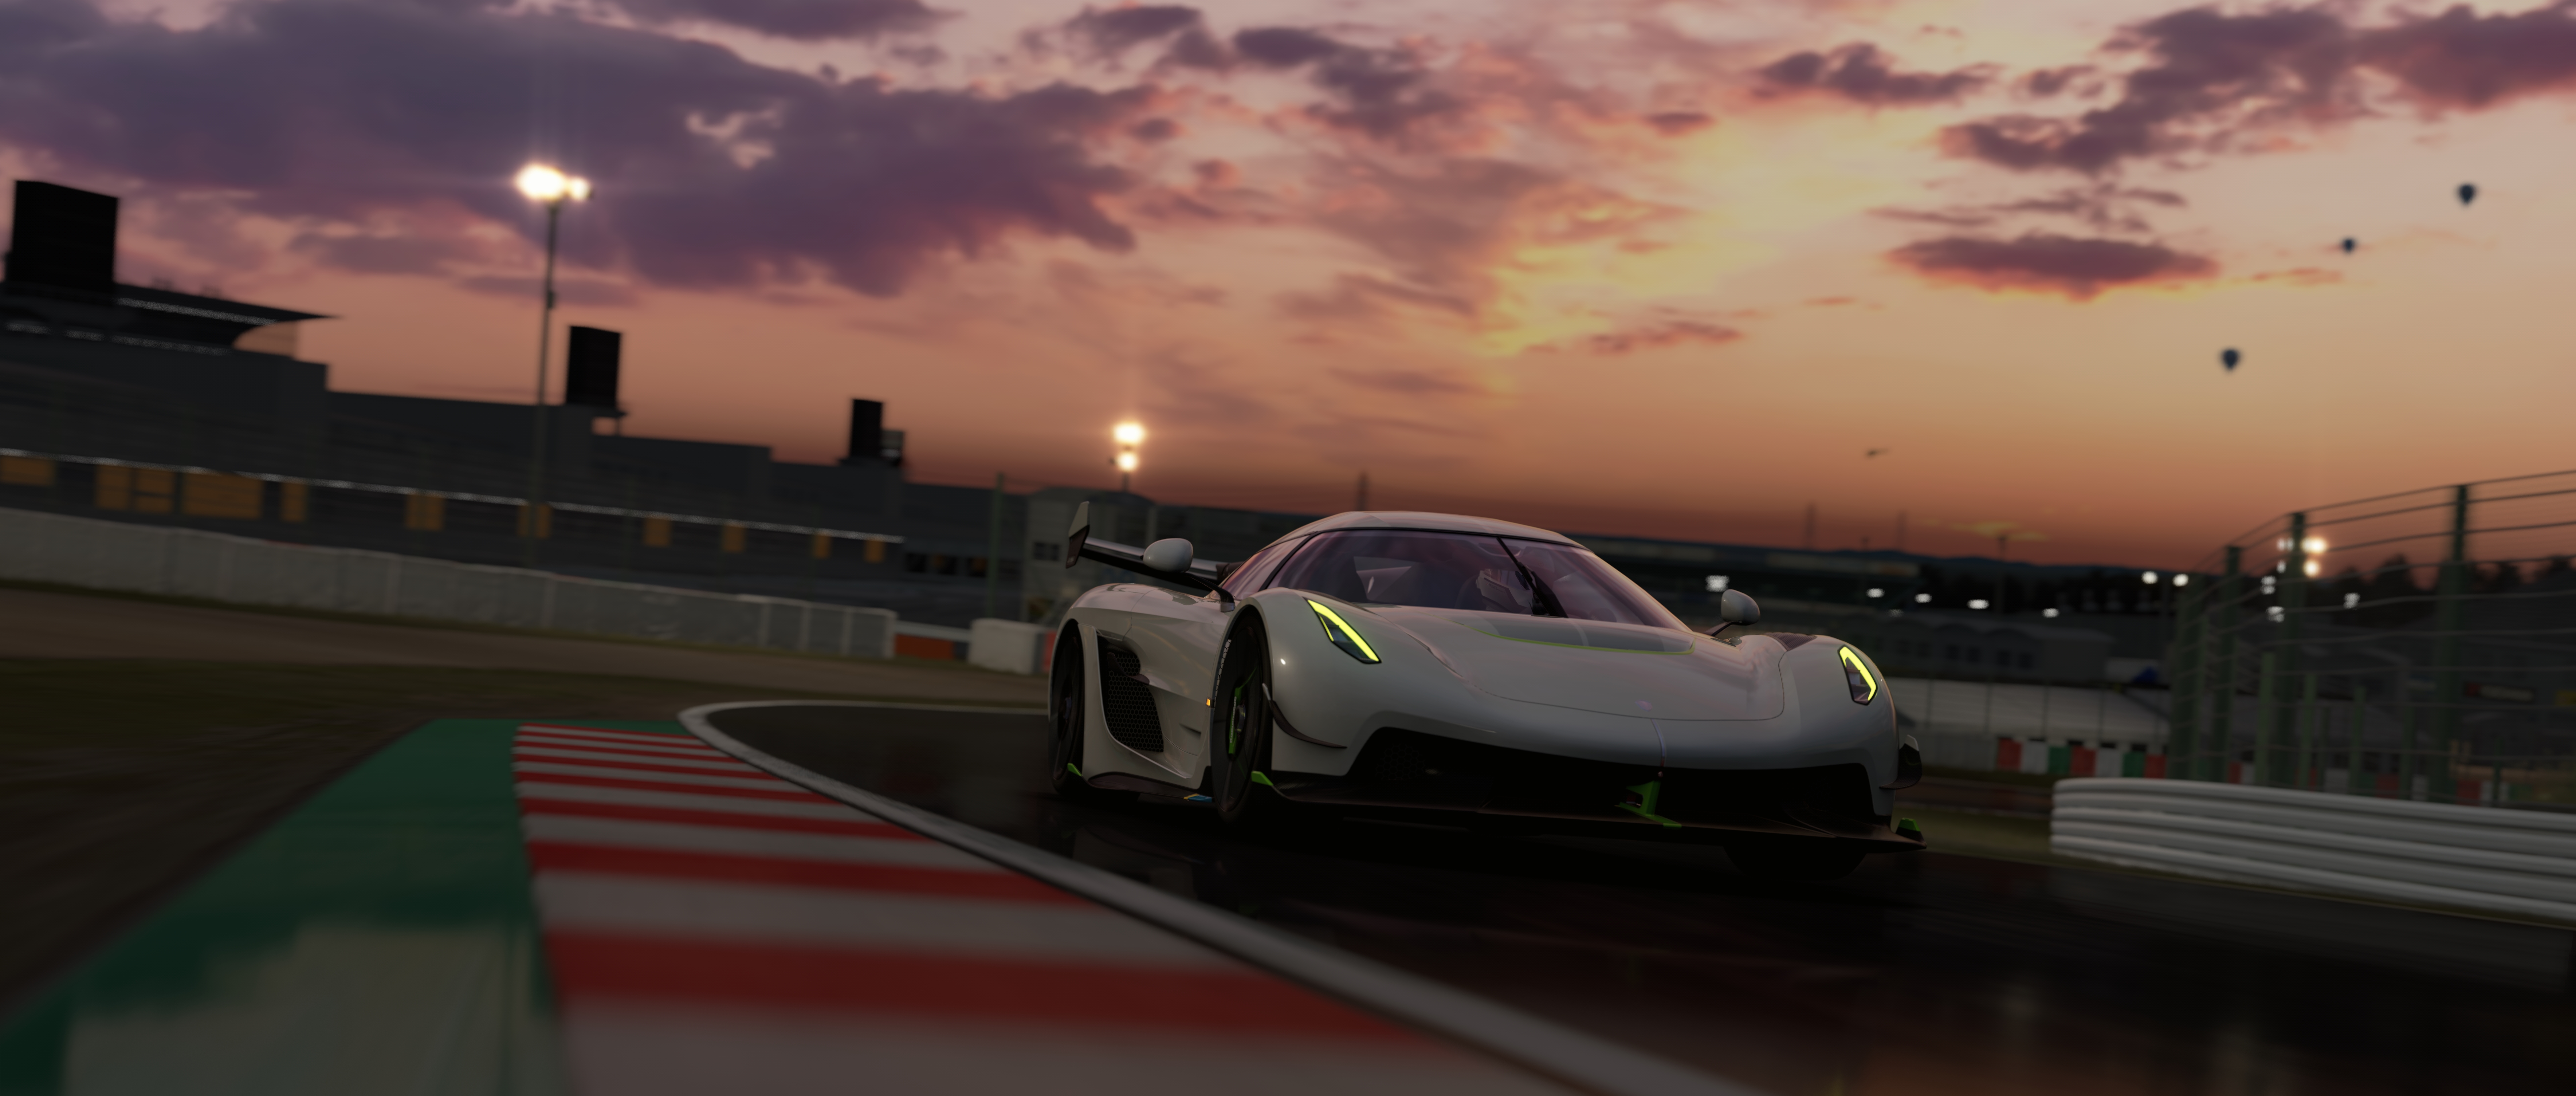 General 7680x3269 Koenigsegg Jesko tracks PC gaming Assetto Corsa video games car frontal view race tracks clouds sky sunset sunset glow blurred blurry background CGI